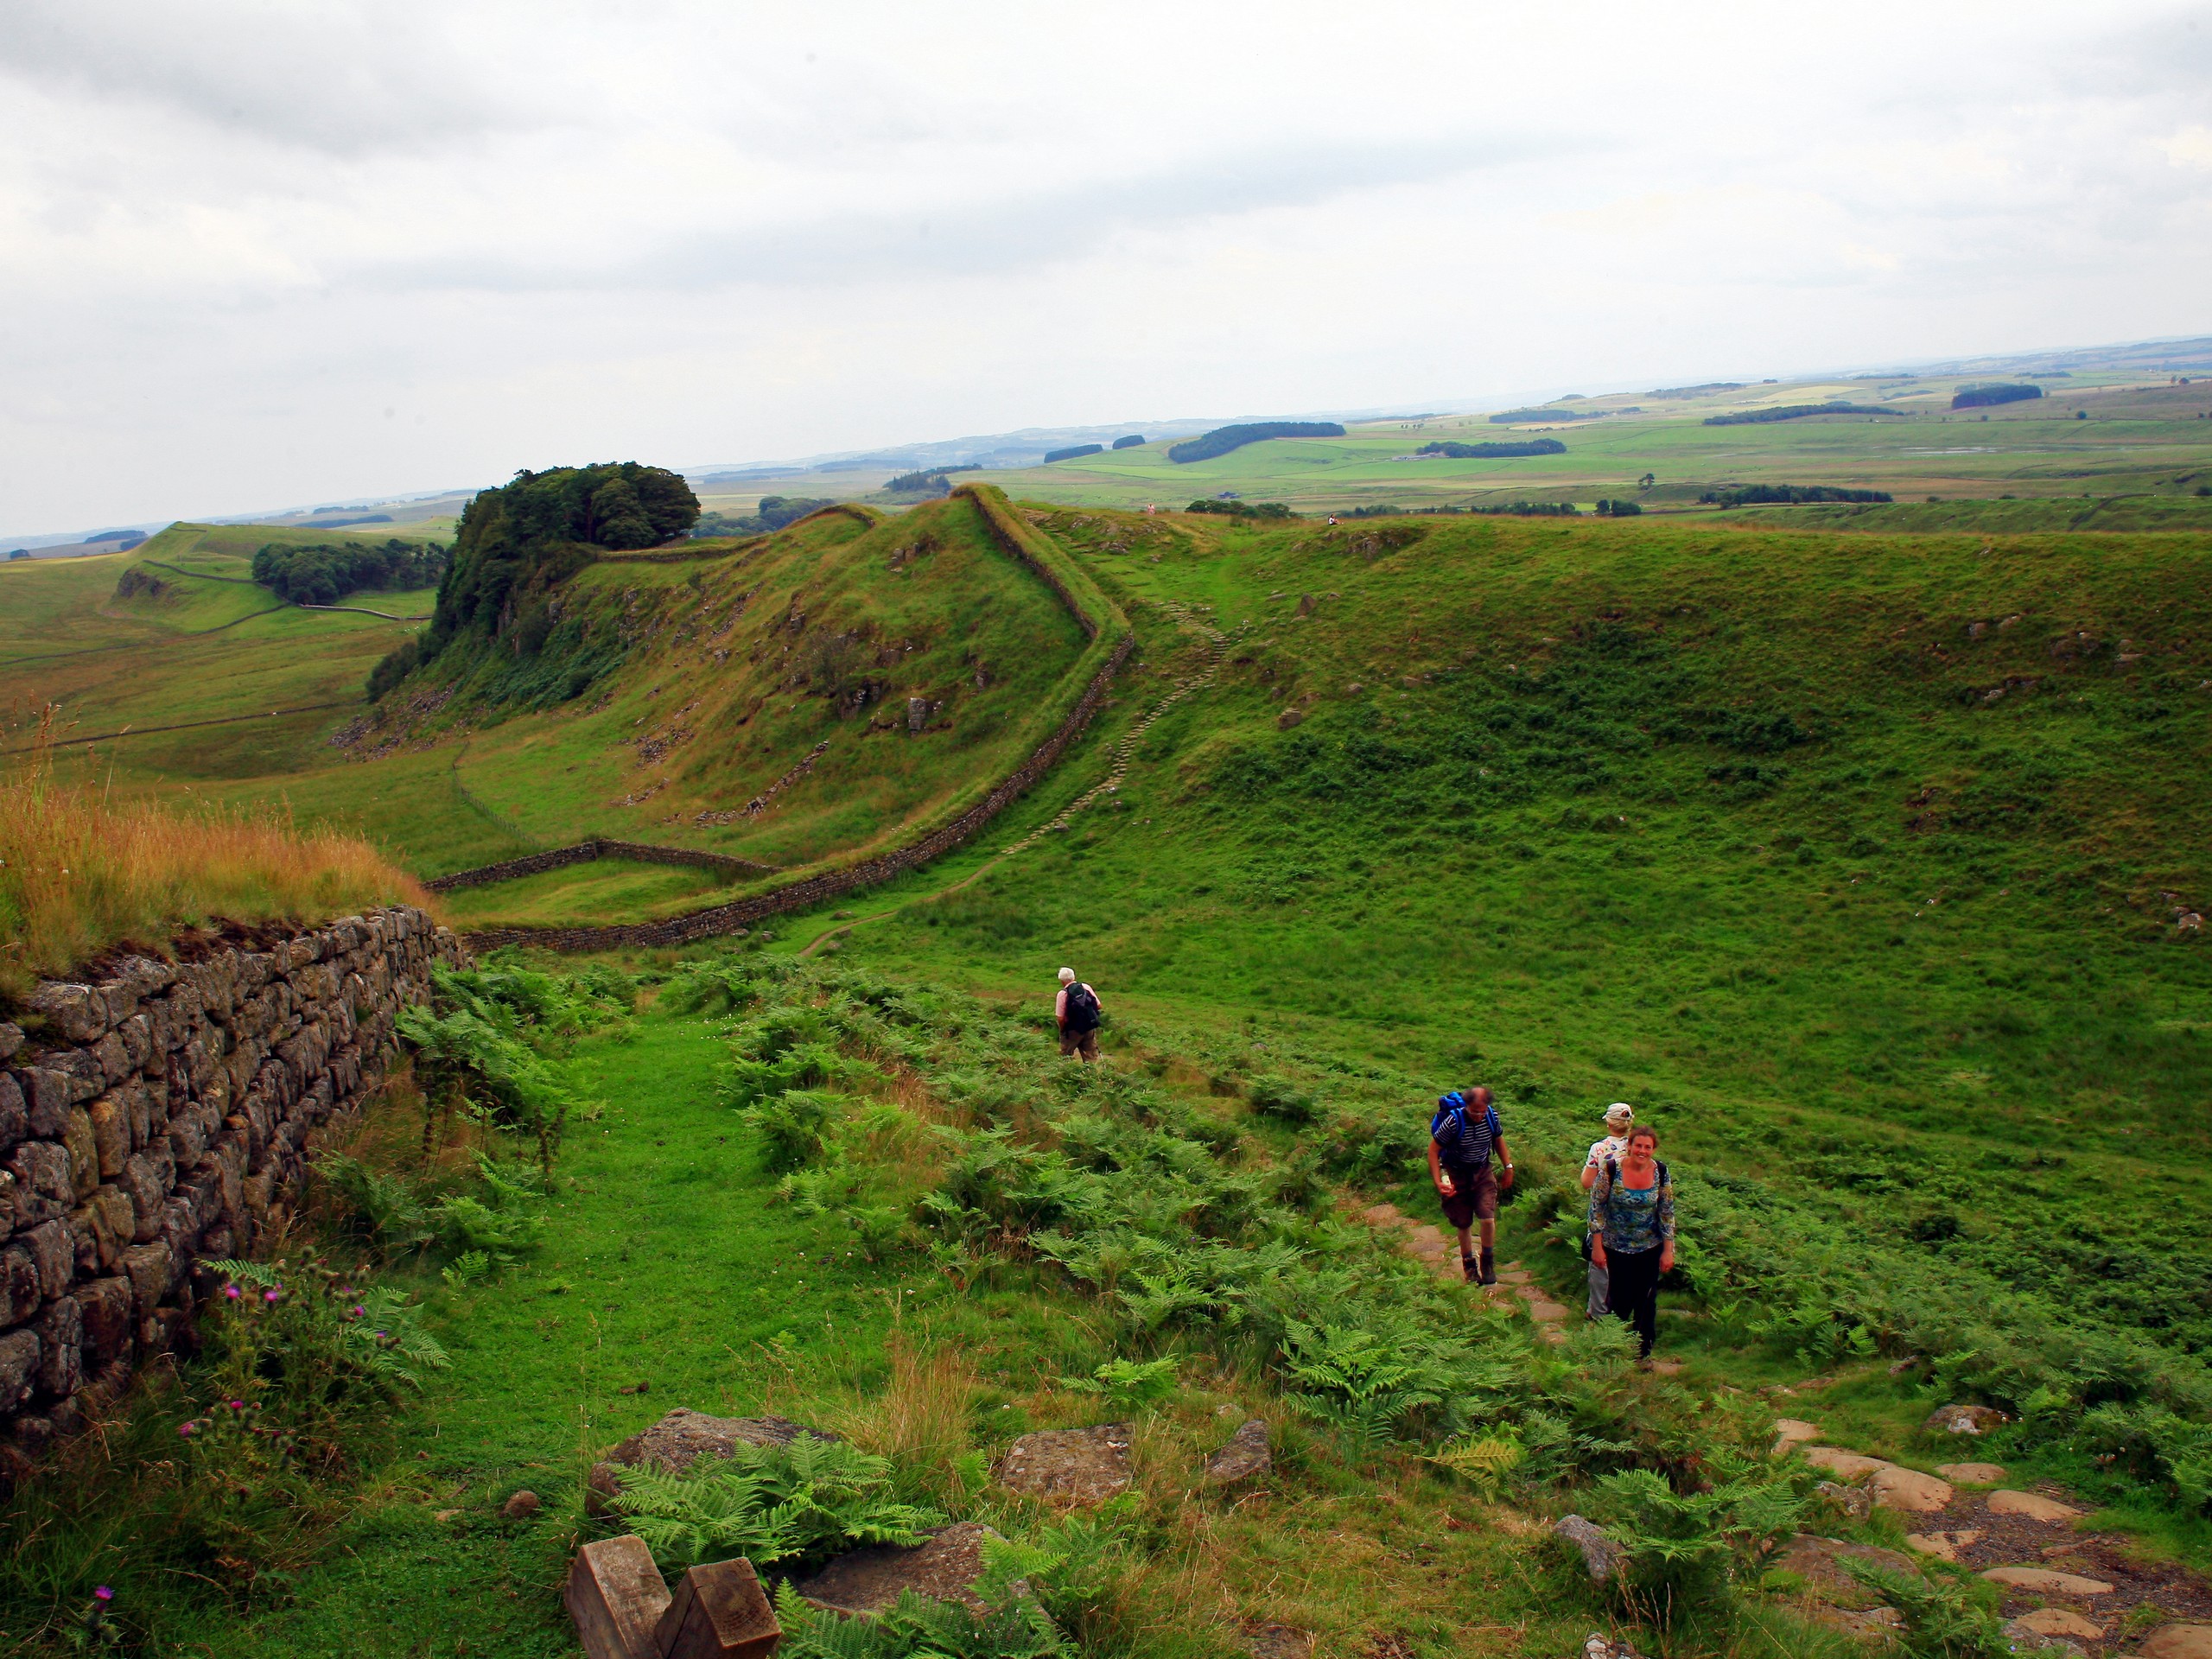 Hadrian's Wall path in England